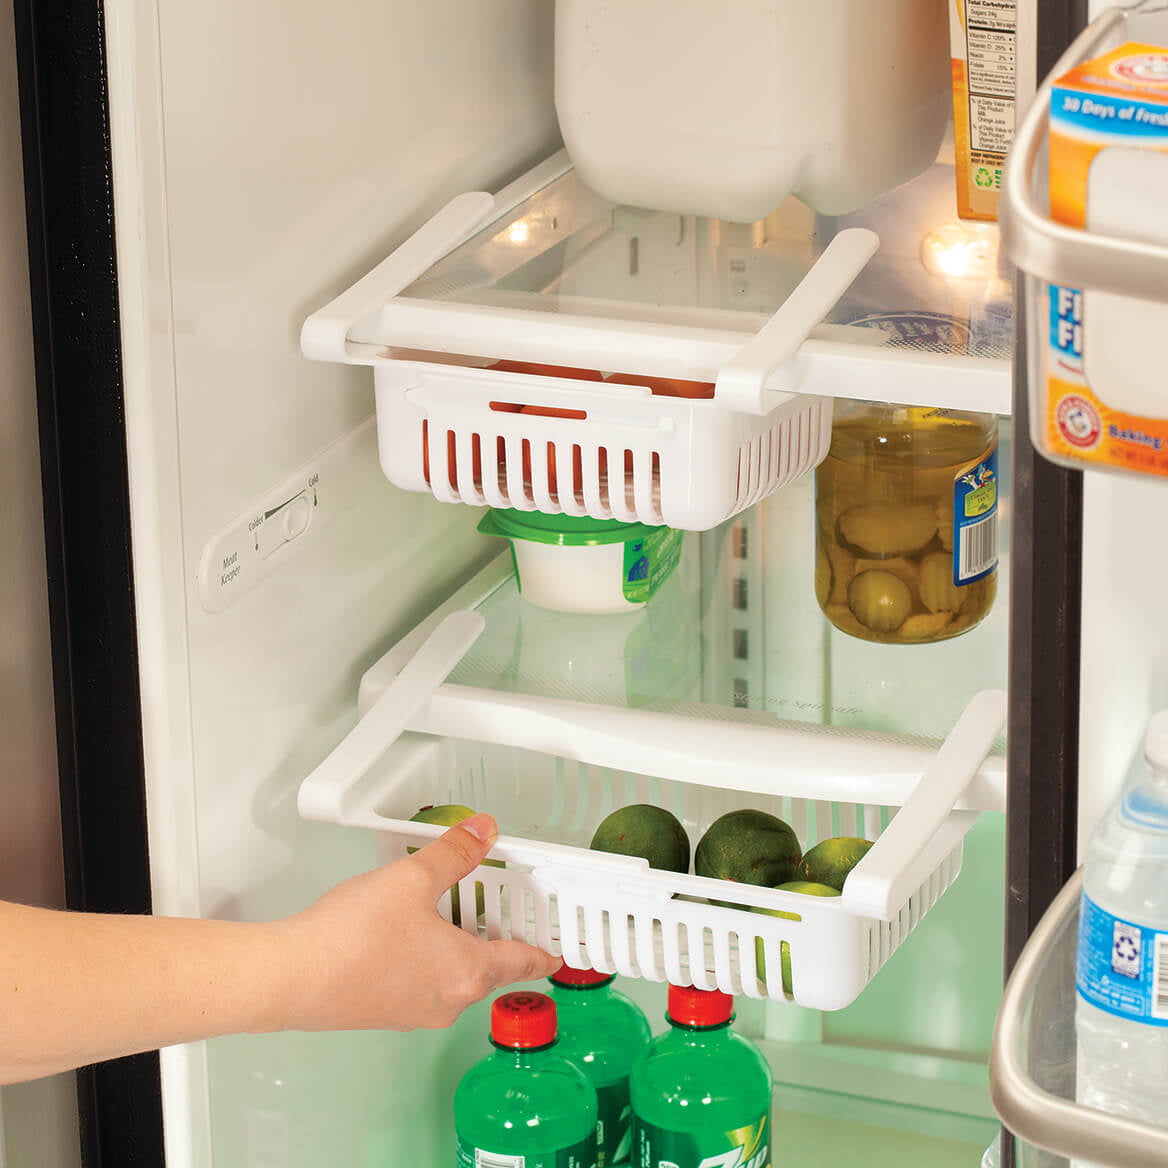 These Space-Saving Fridge Organizers Are on Sale for 41% Off at